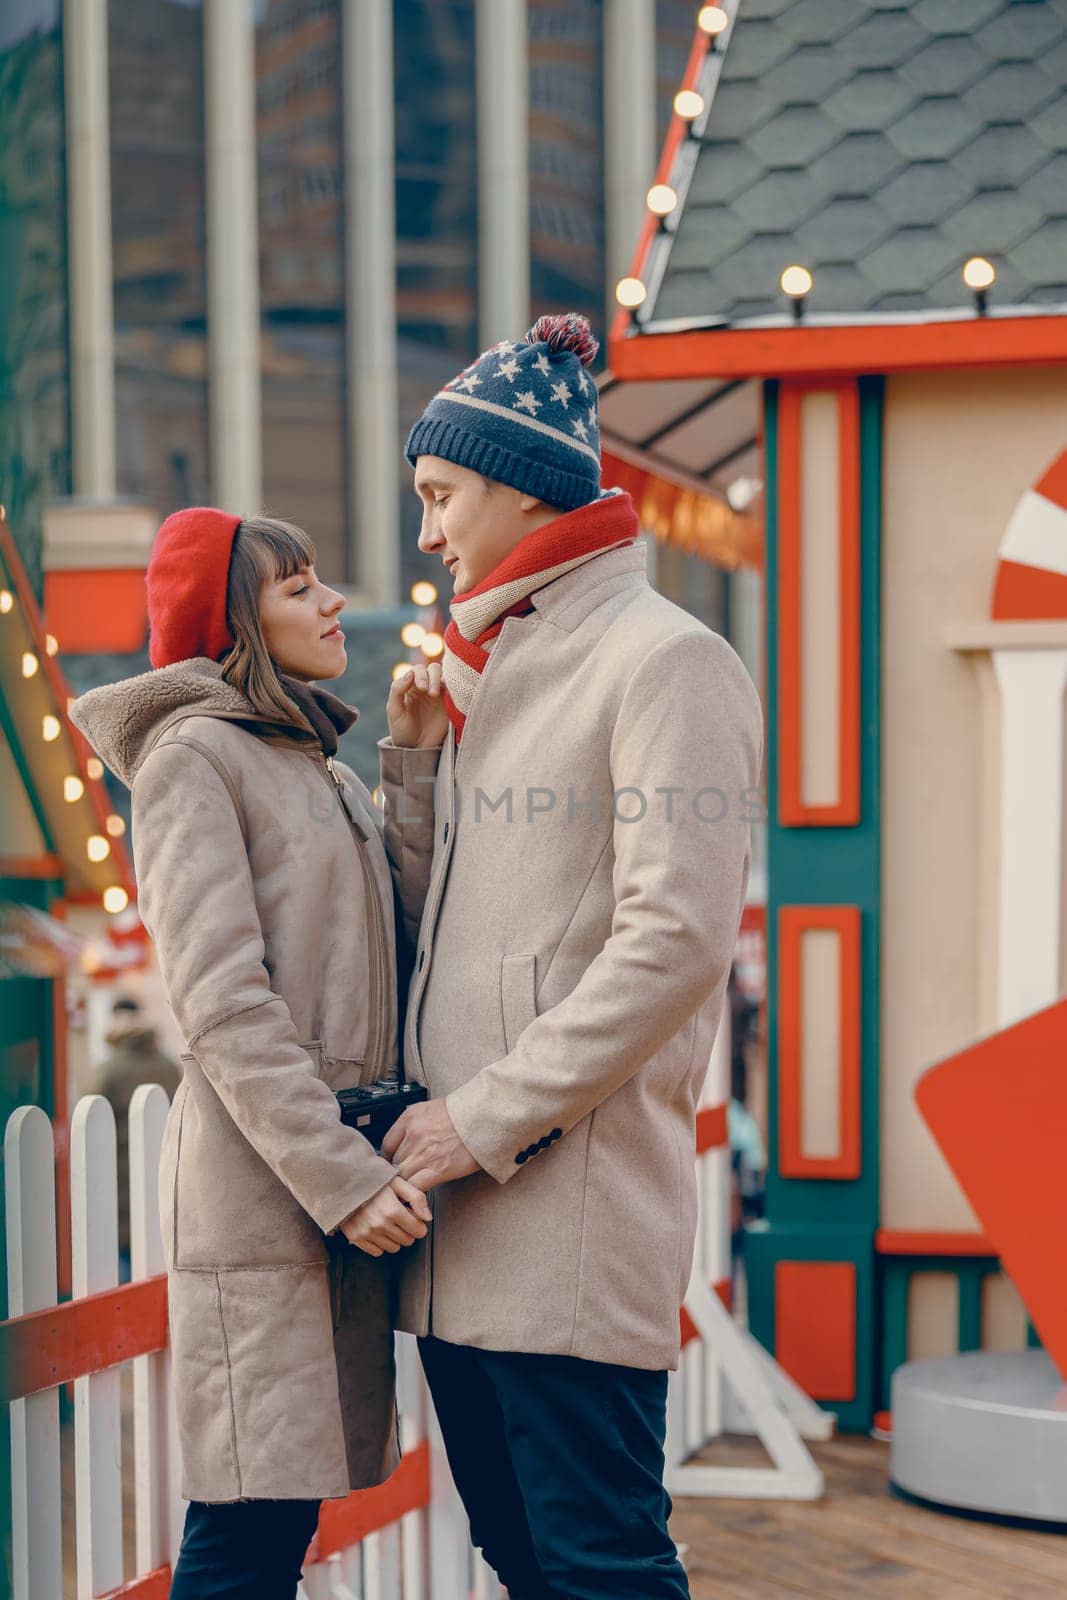 Engaged couple sharing a tender moment surrounded by festive Christmas market stalls by Yaroslav_astakhov